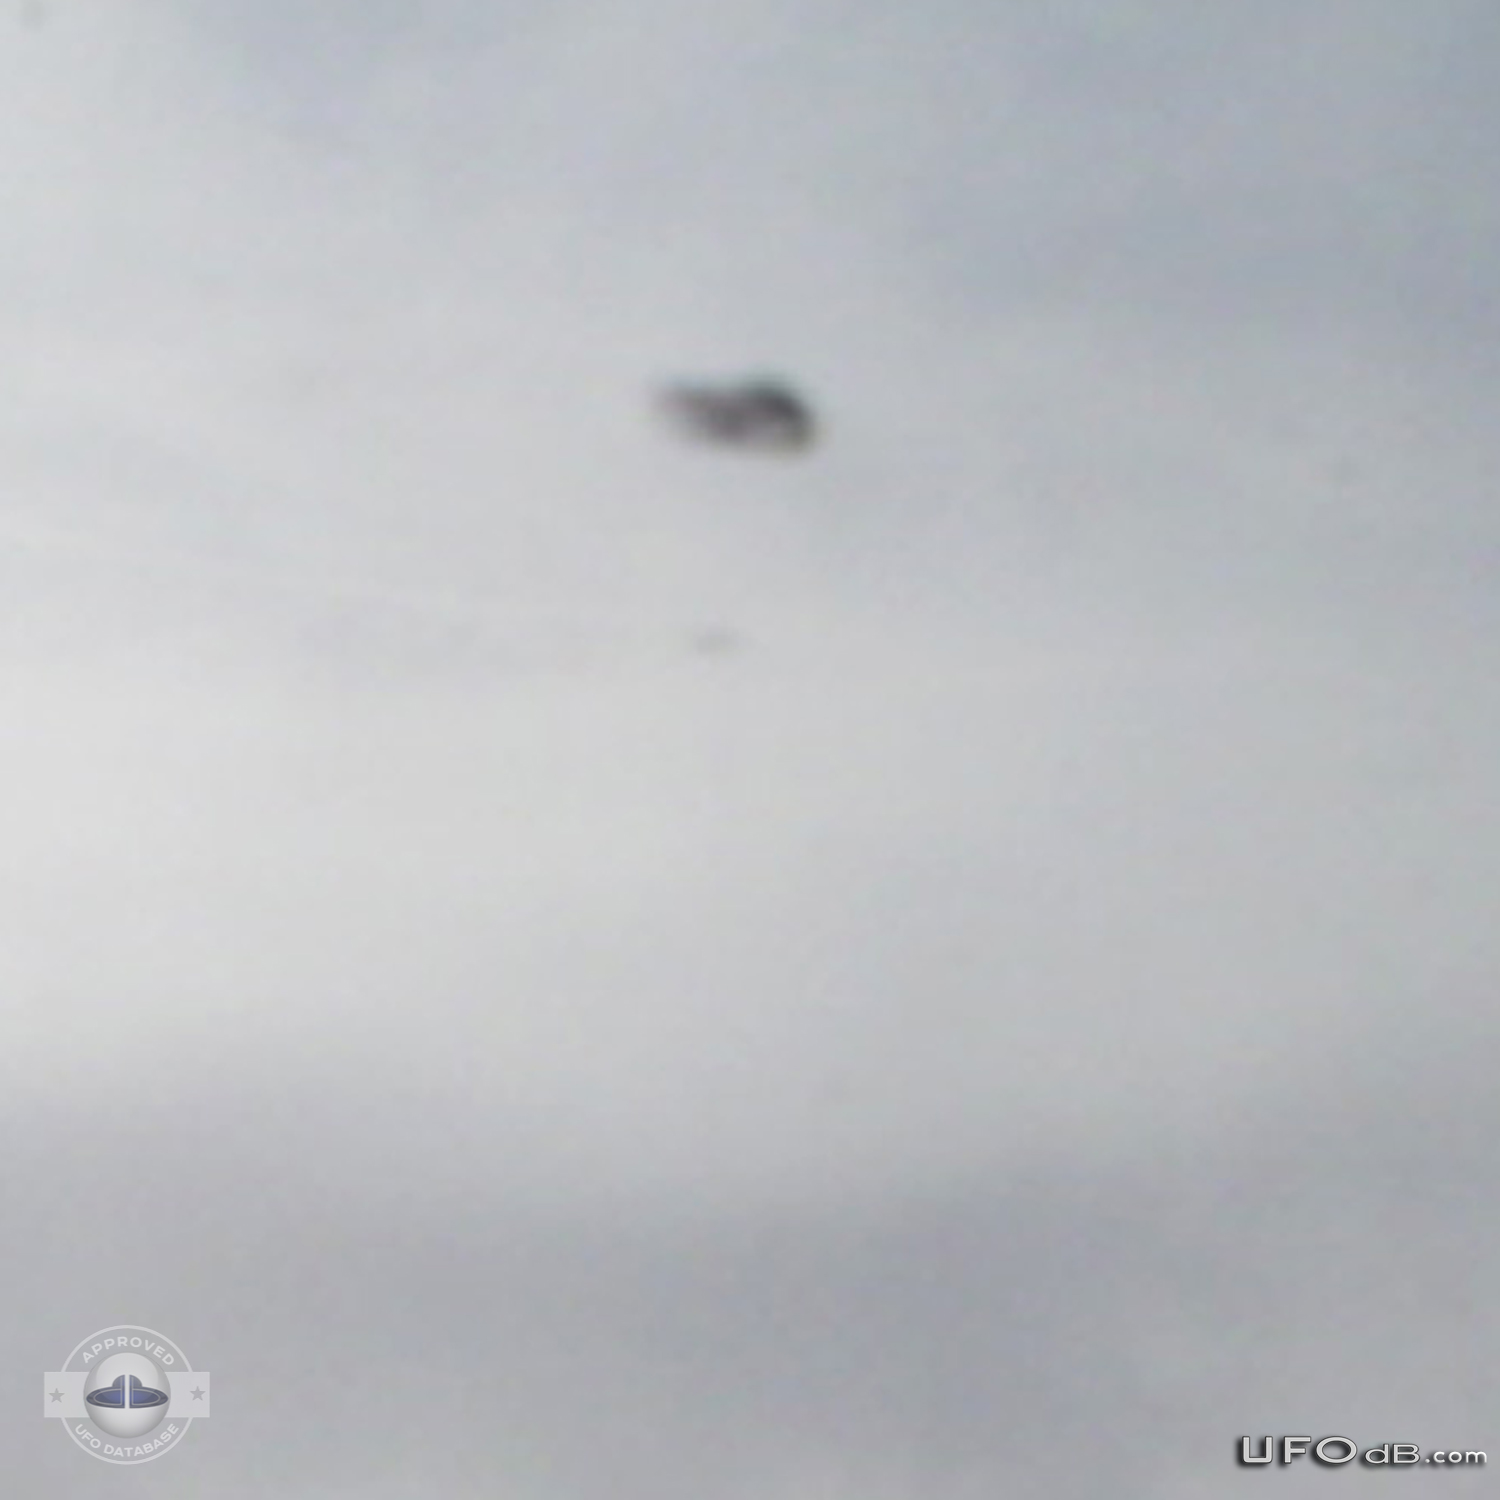 KLM Airplane passenger see UFO near wing | Amsterdam, Netherlands 2006 UFO Picture #255-4